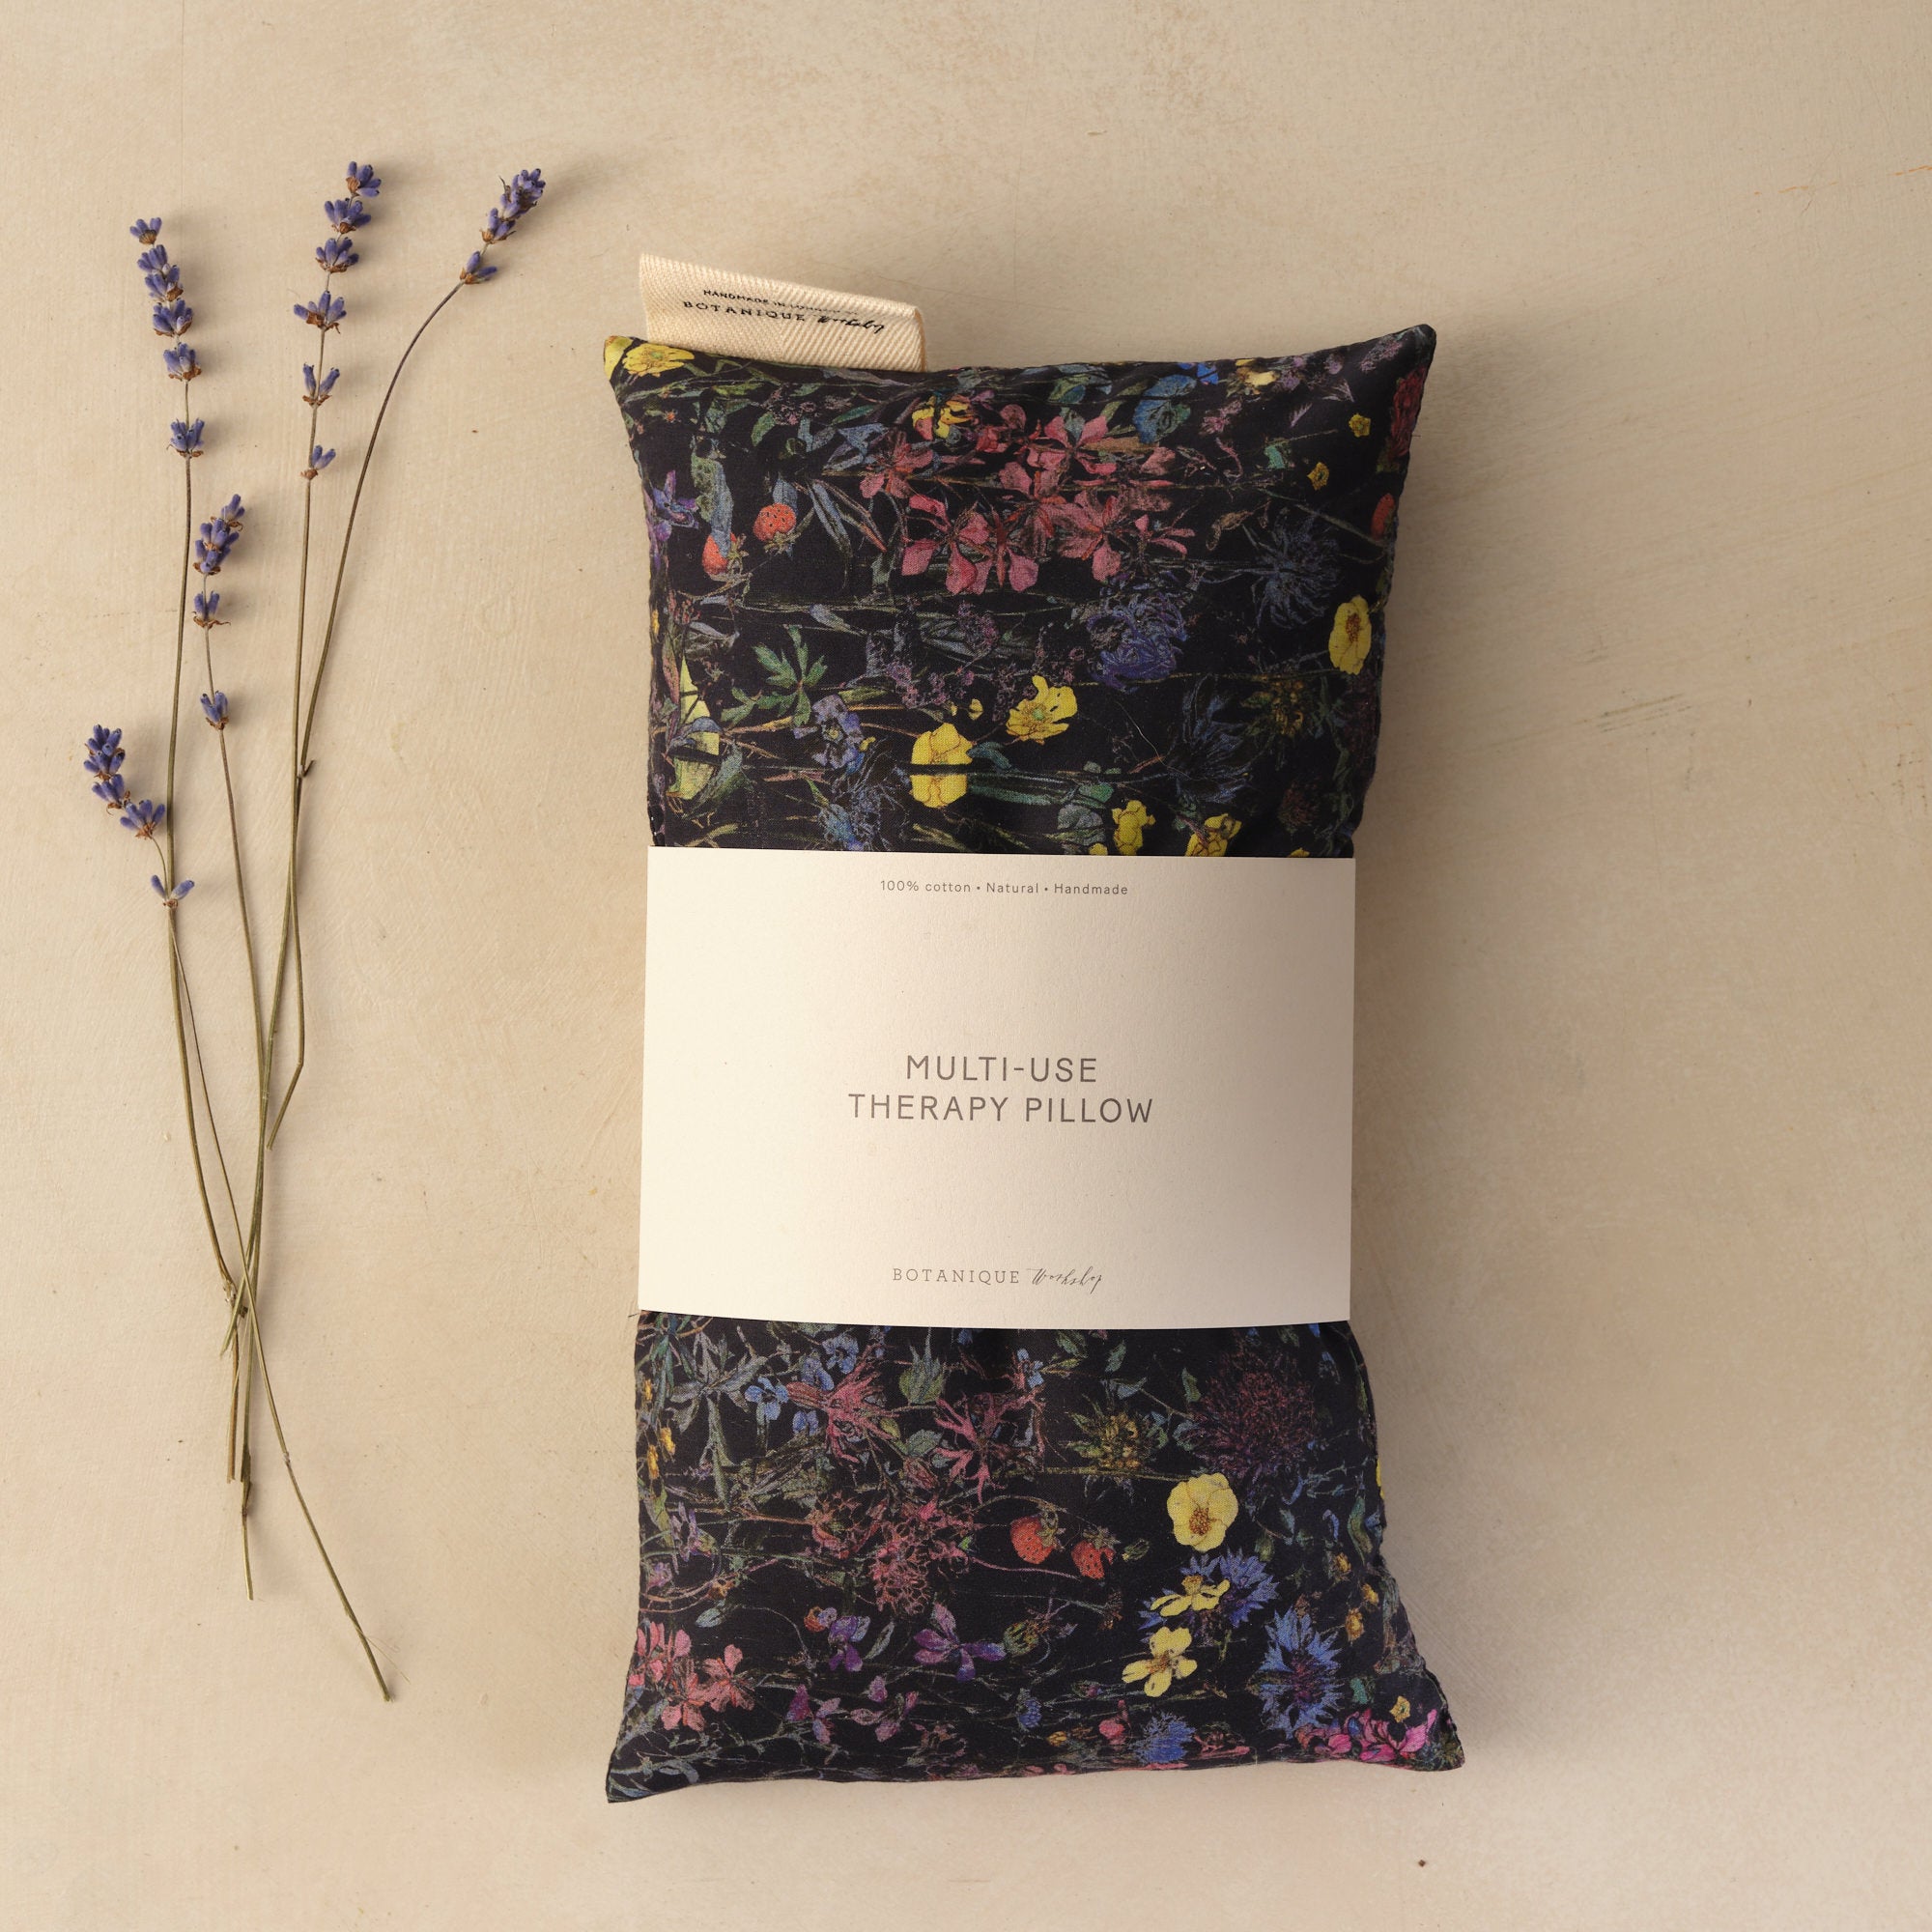 Multi-Use Lavender Therapy Pillow: Large Liberty Print